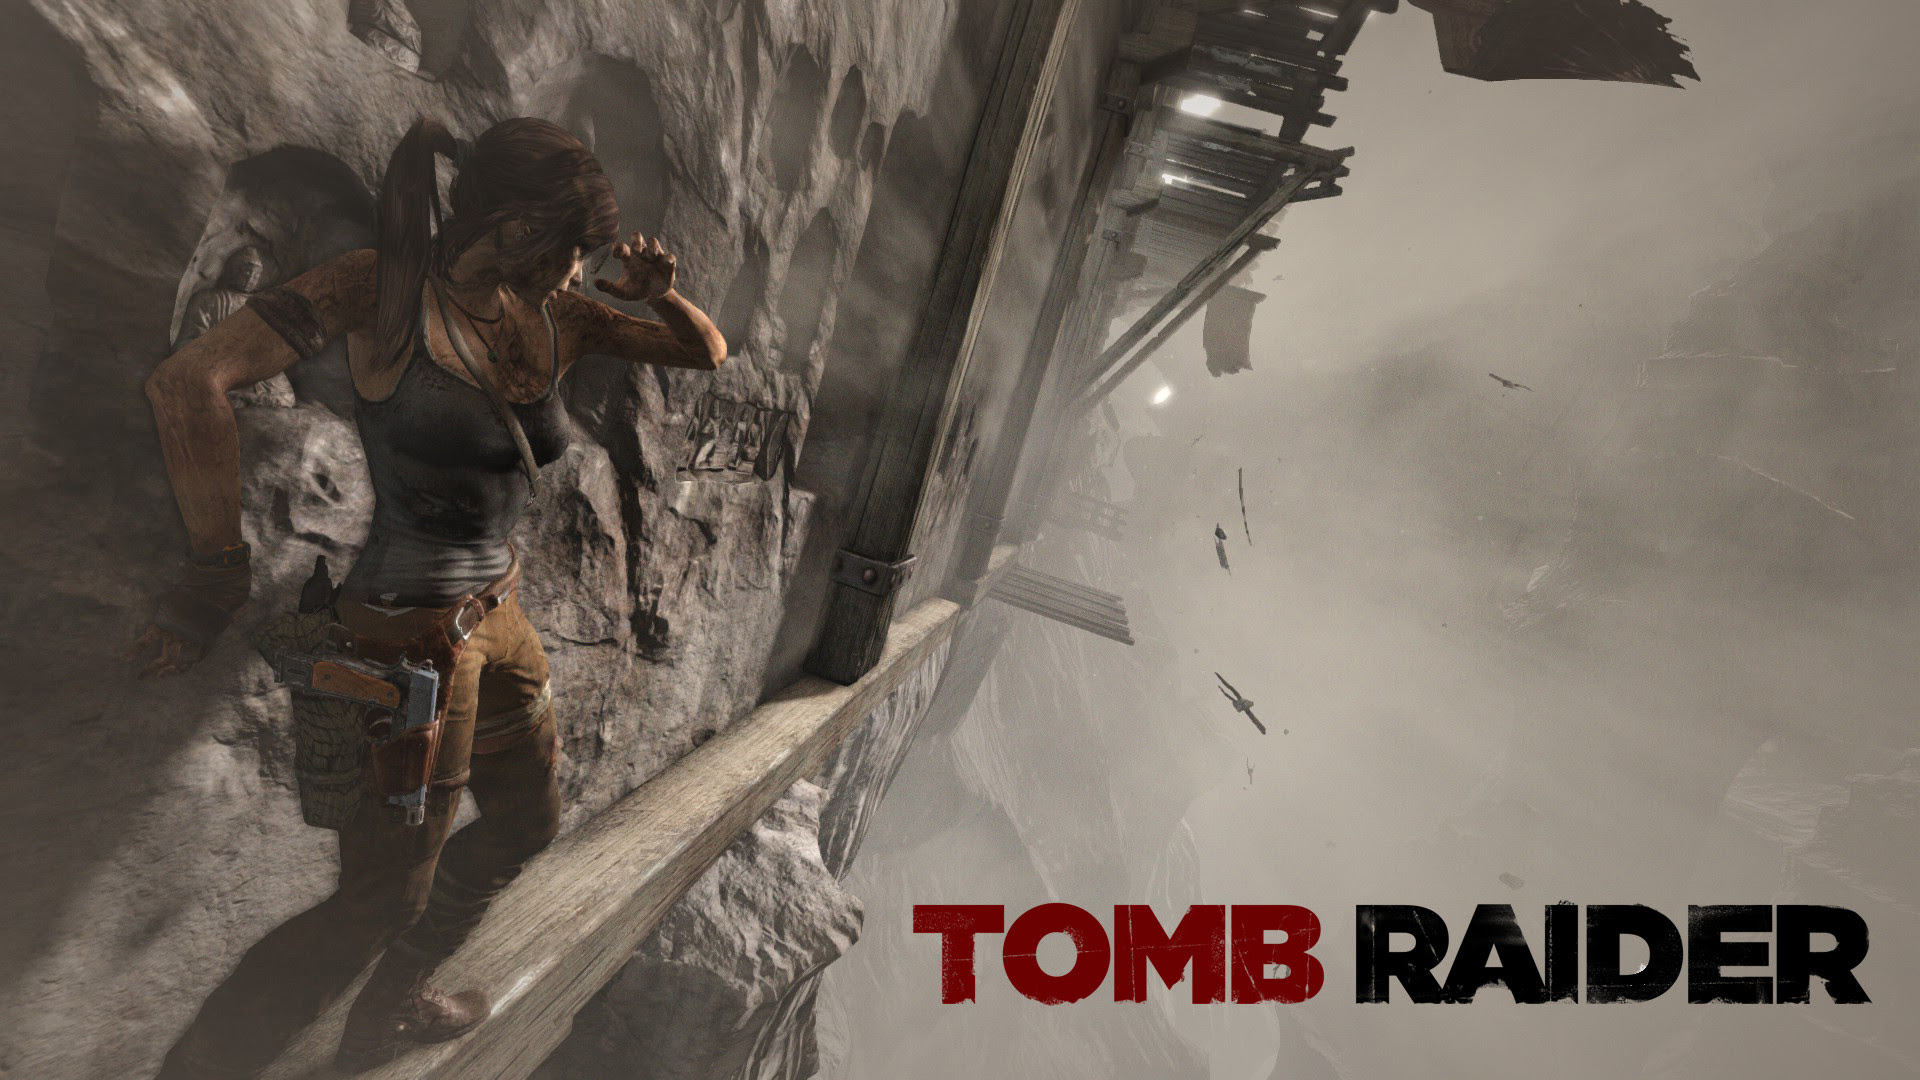 Tomb raider for steam фото 54